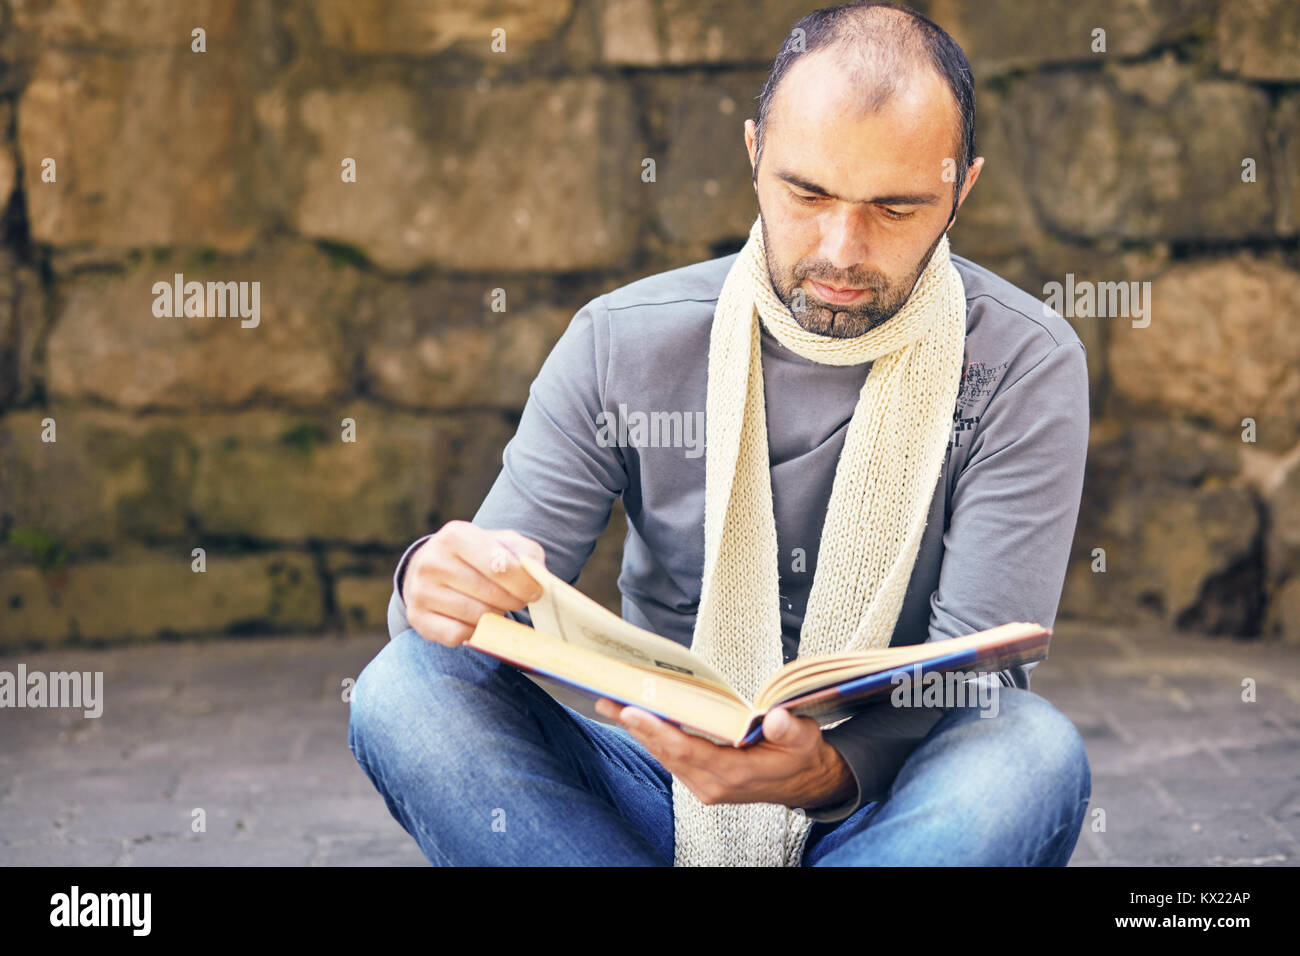 Businessman Working Reading Book Concept Stock Photo